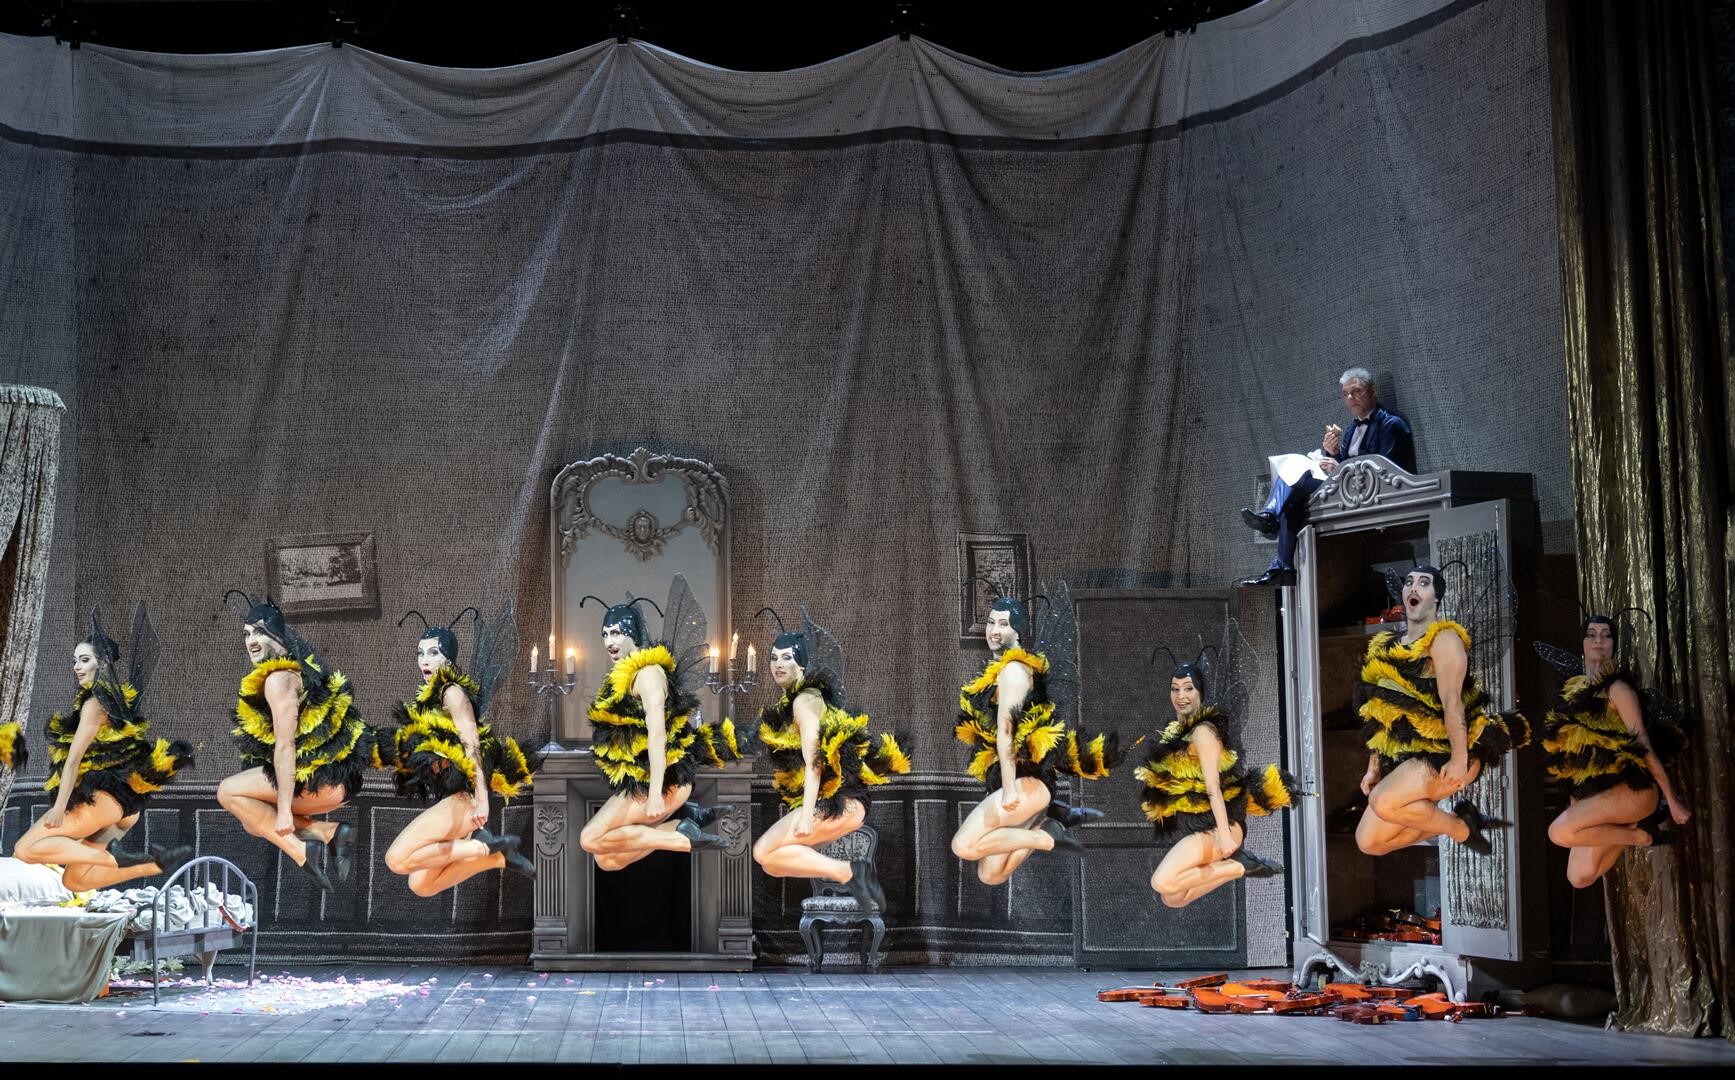 The arrival of Aristée in act 1 is announced by a ballet of bees. Max Hopp sits on top of the furniture and looks on. (Photo: Monika Ritterhaus)